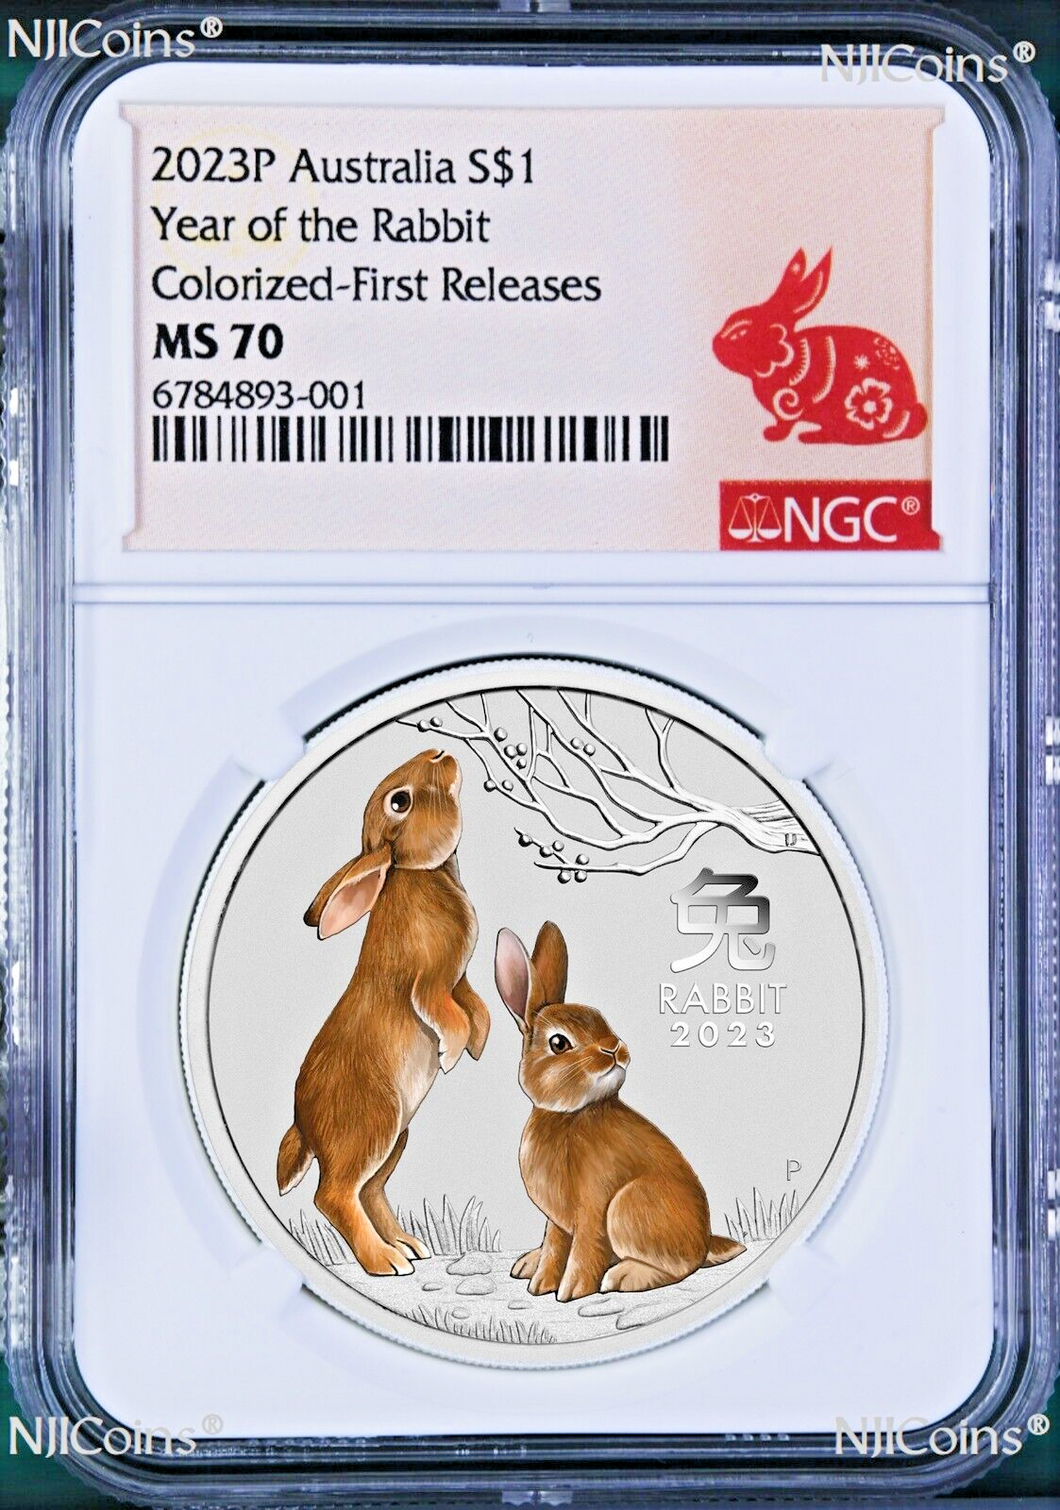 2023 P Australia Colored Silver Lunar Year of the Rabbit NGC MS70 1oz $1 Coin